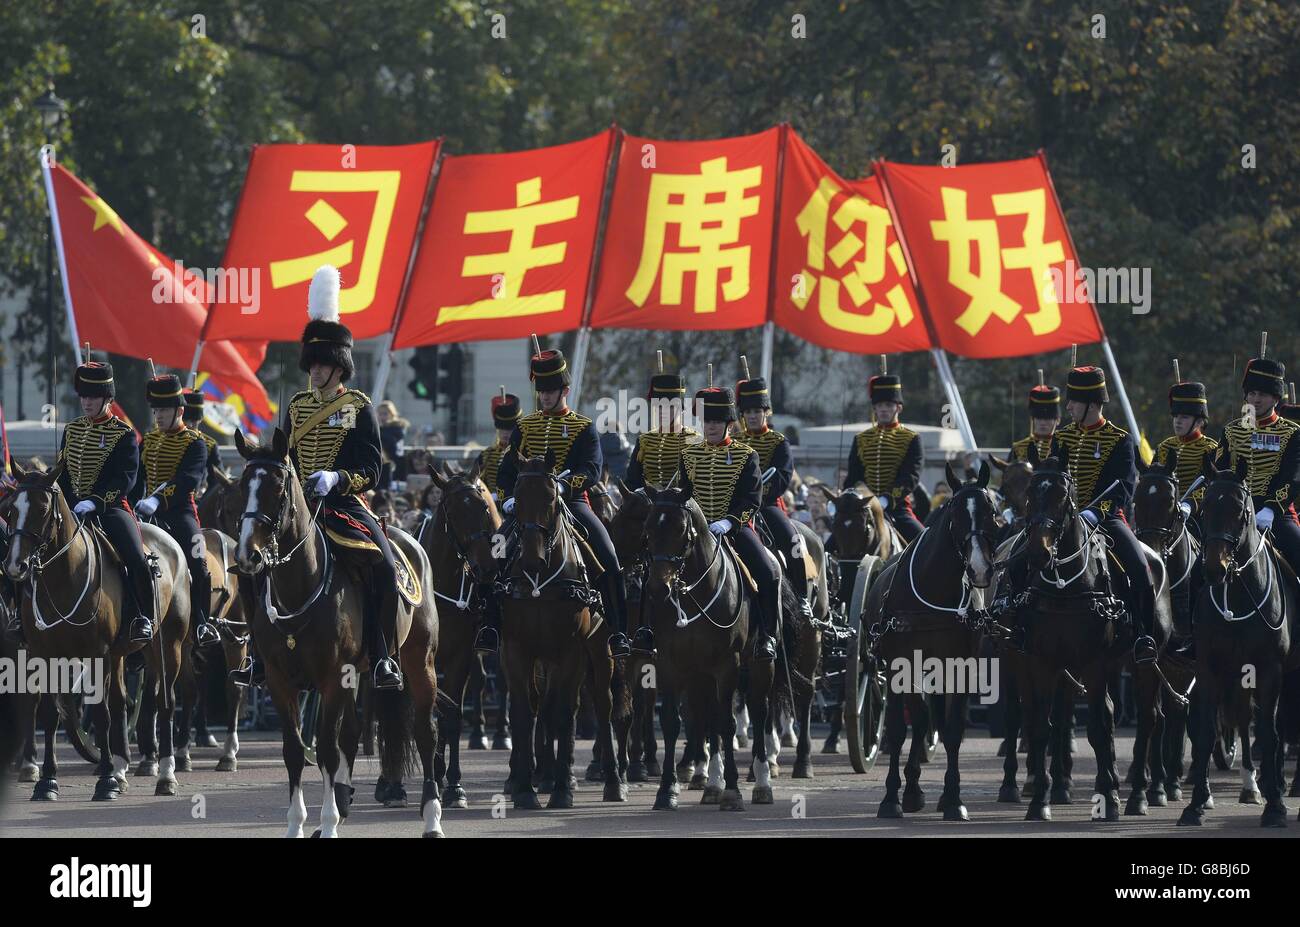 Members of the cavalry along The Mall in London during a ceremonial welcome for the Chinese President Xi Jinping and his wife Peng Liyuan on the first day of their state visit to the UK. Stock Photo